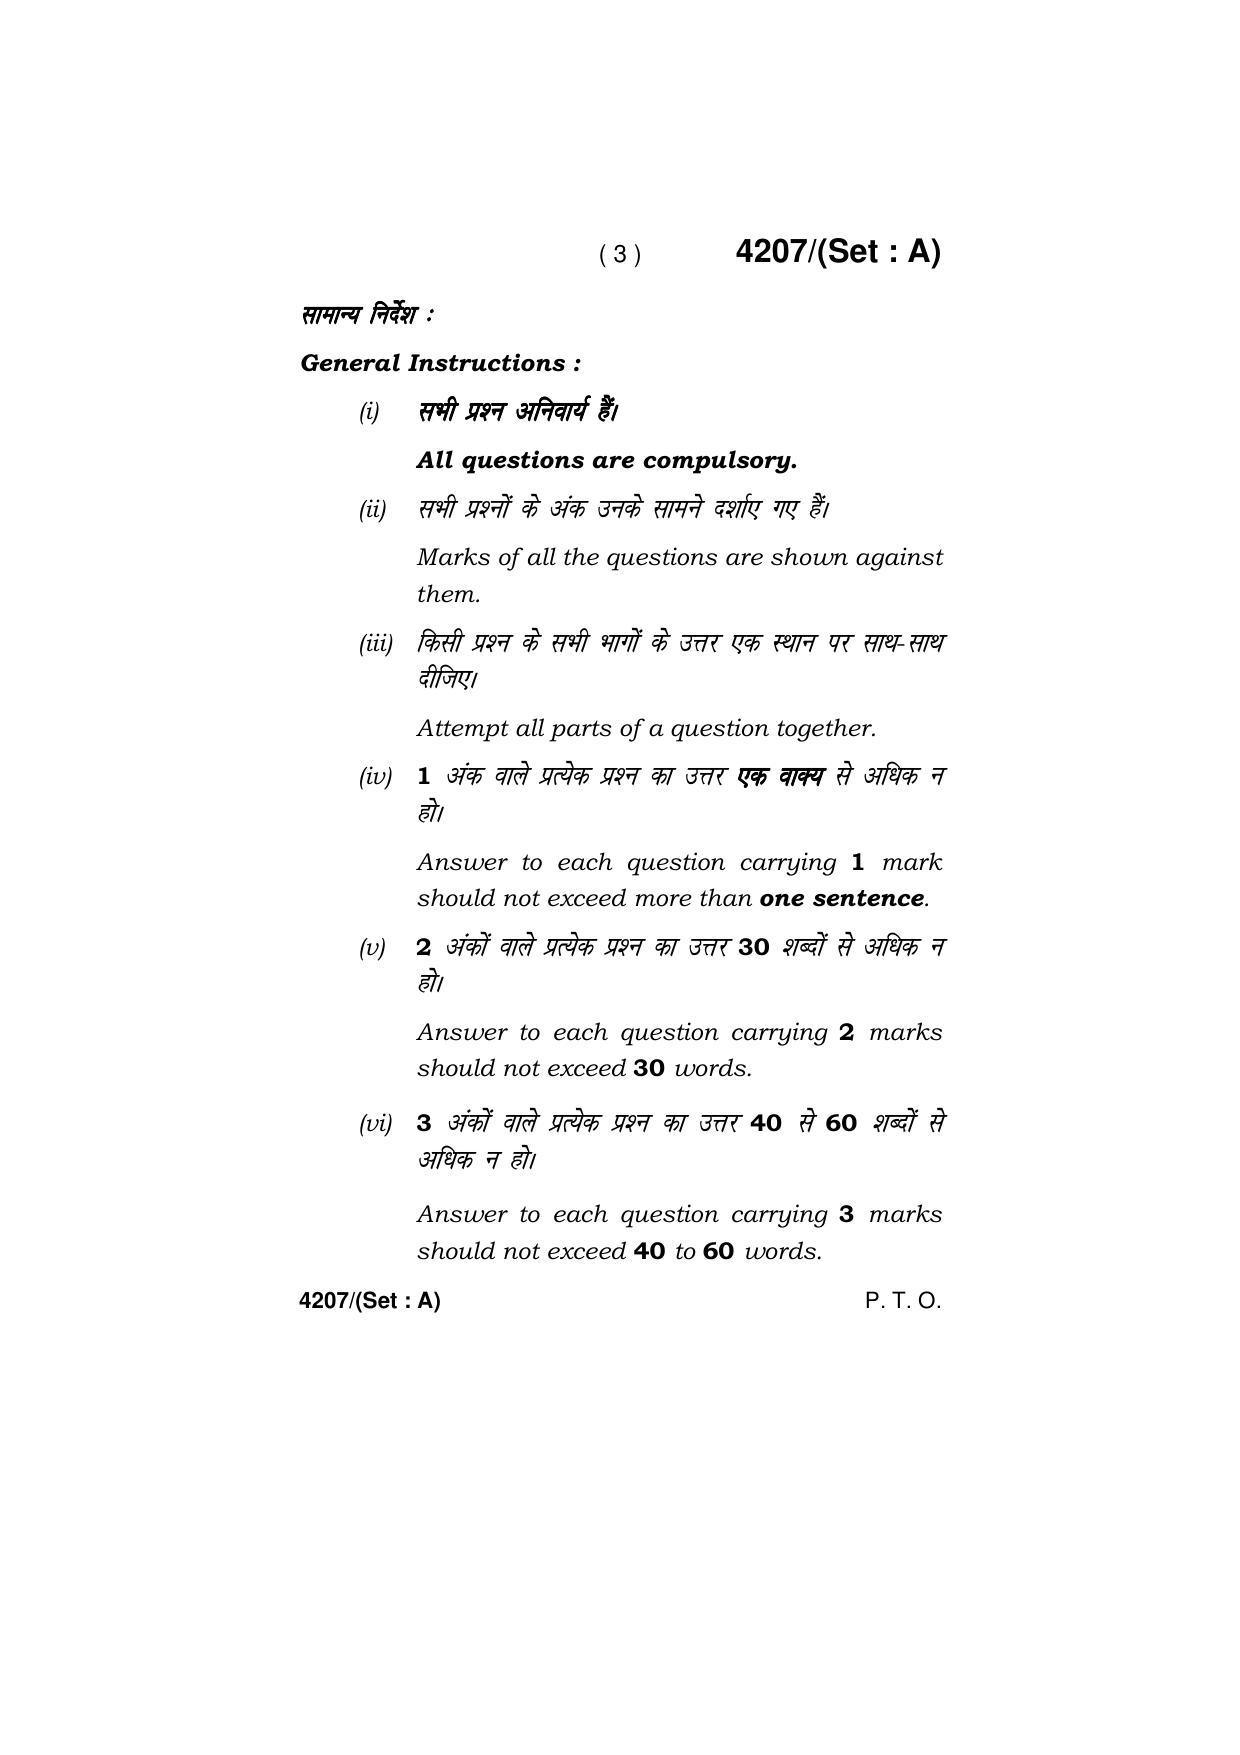 Haryana Board HBSE Class 10 Social Science (All Set) 2019 Question Paper - Page 3